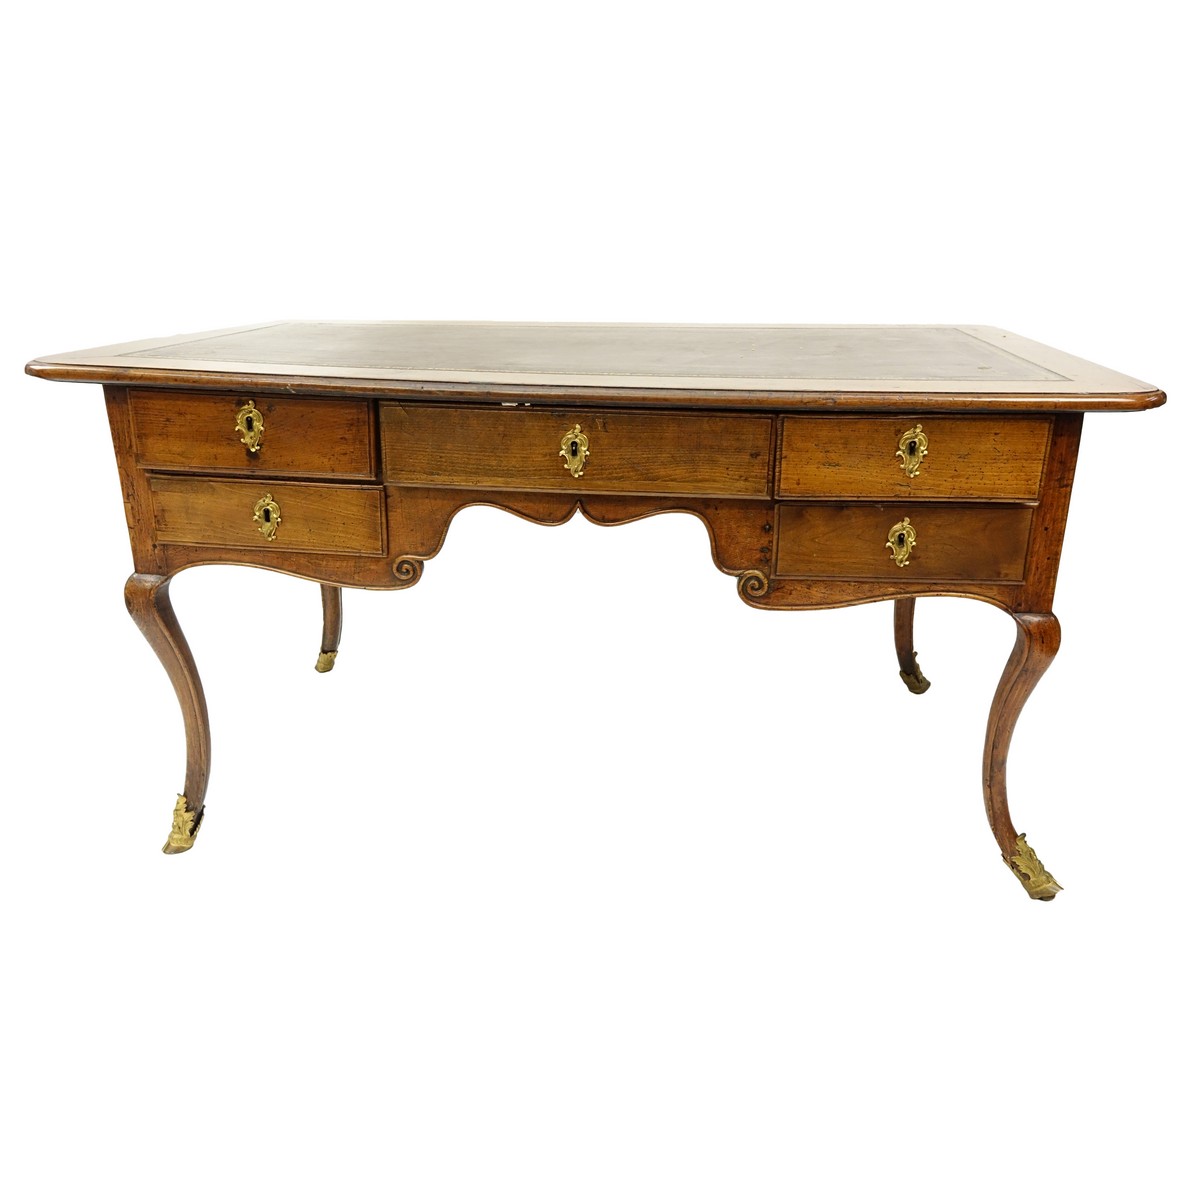 Large 19th Century French Walnut Writing Desk with Tooled Leather Top, Gilt Bronze Mounts. Large center drawer flanked by four fitted drawers, stands on tapering cabriole legs with hooves as feet.